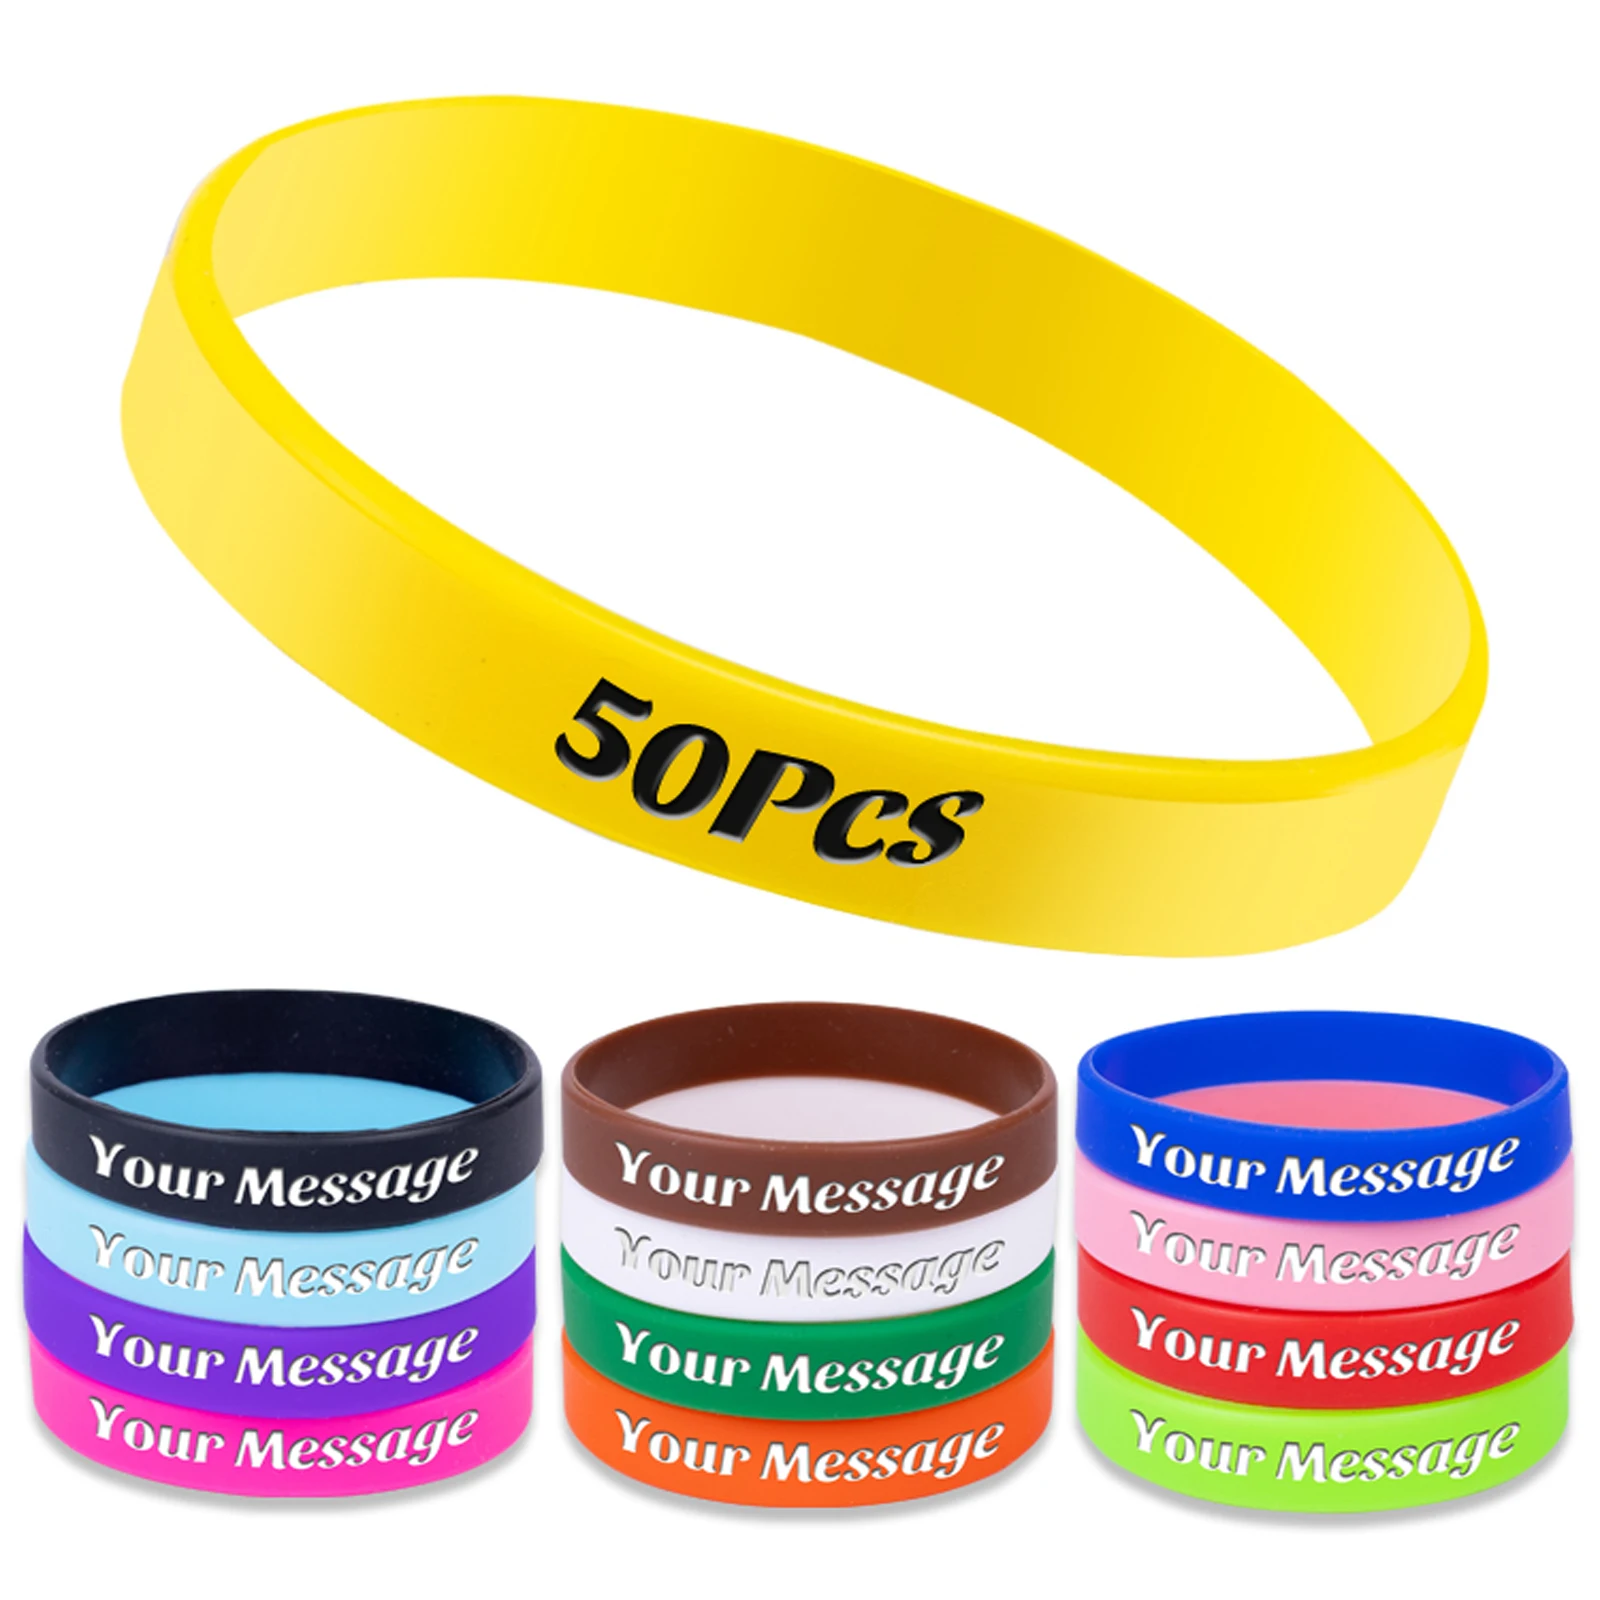 50Pcs Personalized Silicone Wristbands Custom Rubber Bracelets for Motivation, Events, Gifts, Support, Fundraisers, Awareness